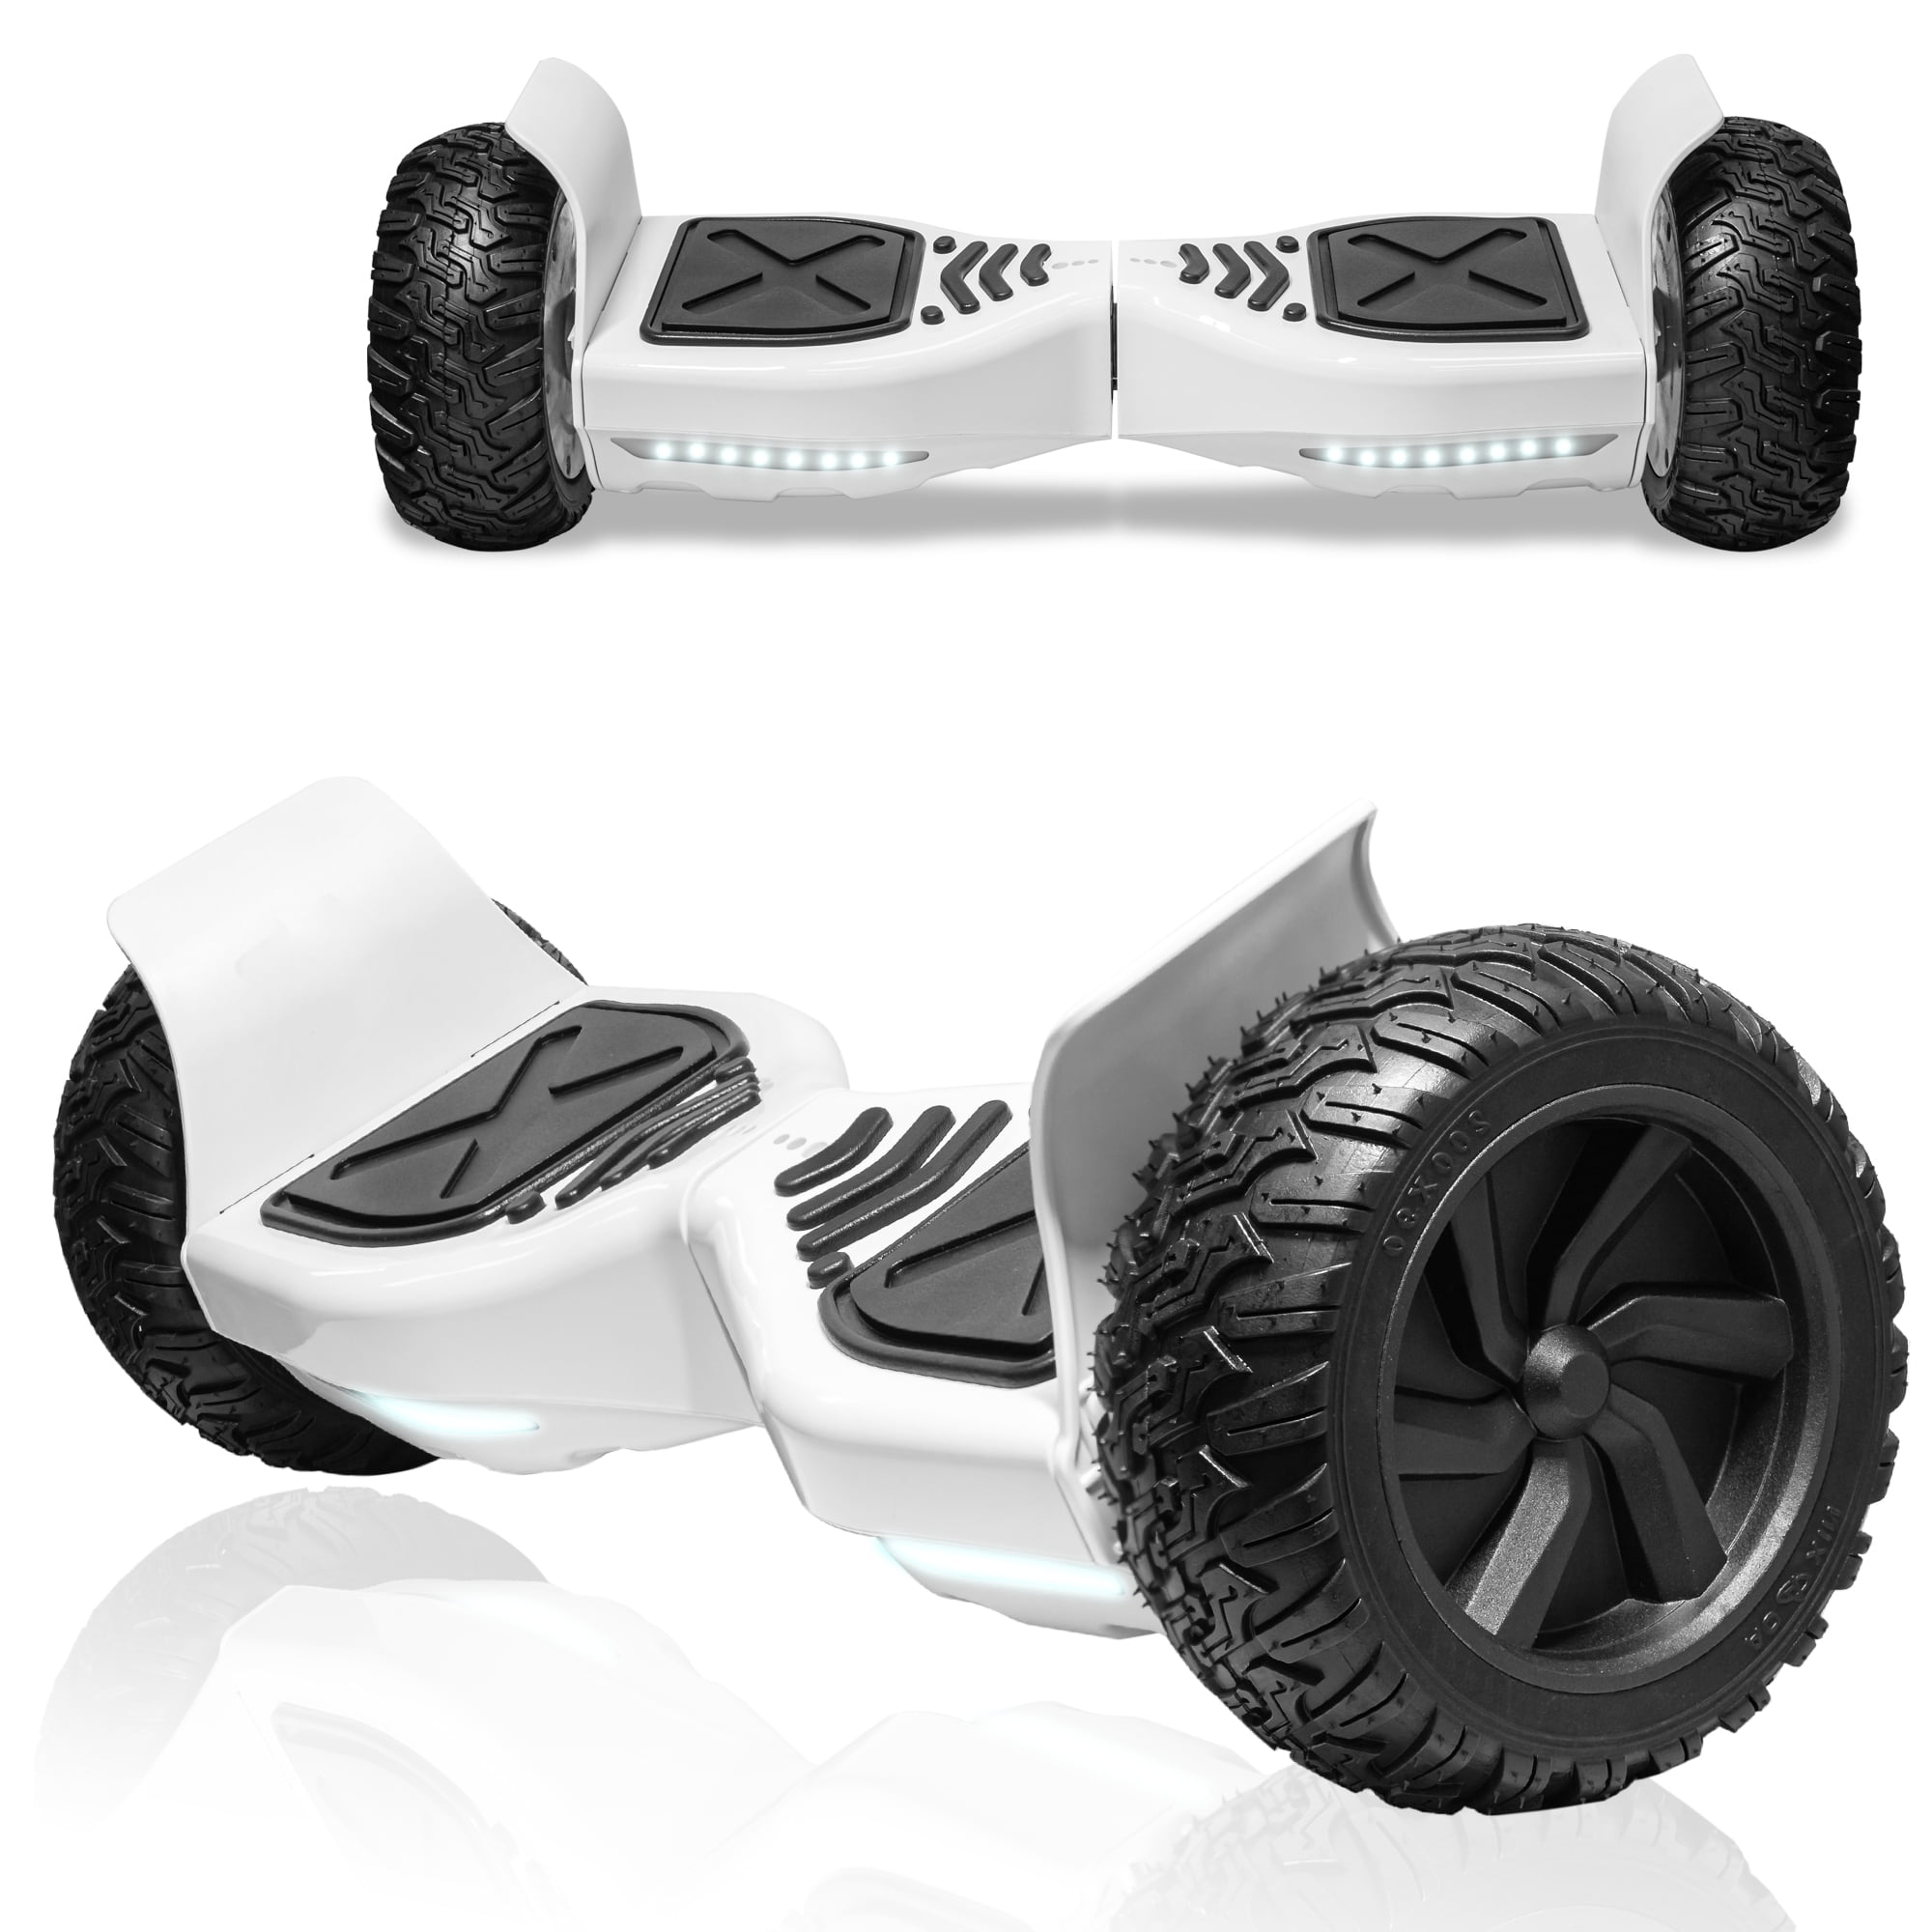 8.5" Off Road Electric Hoverboard LED Bluetooth Hoover board no bag All terrian 